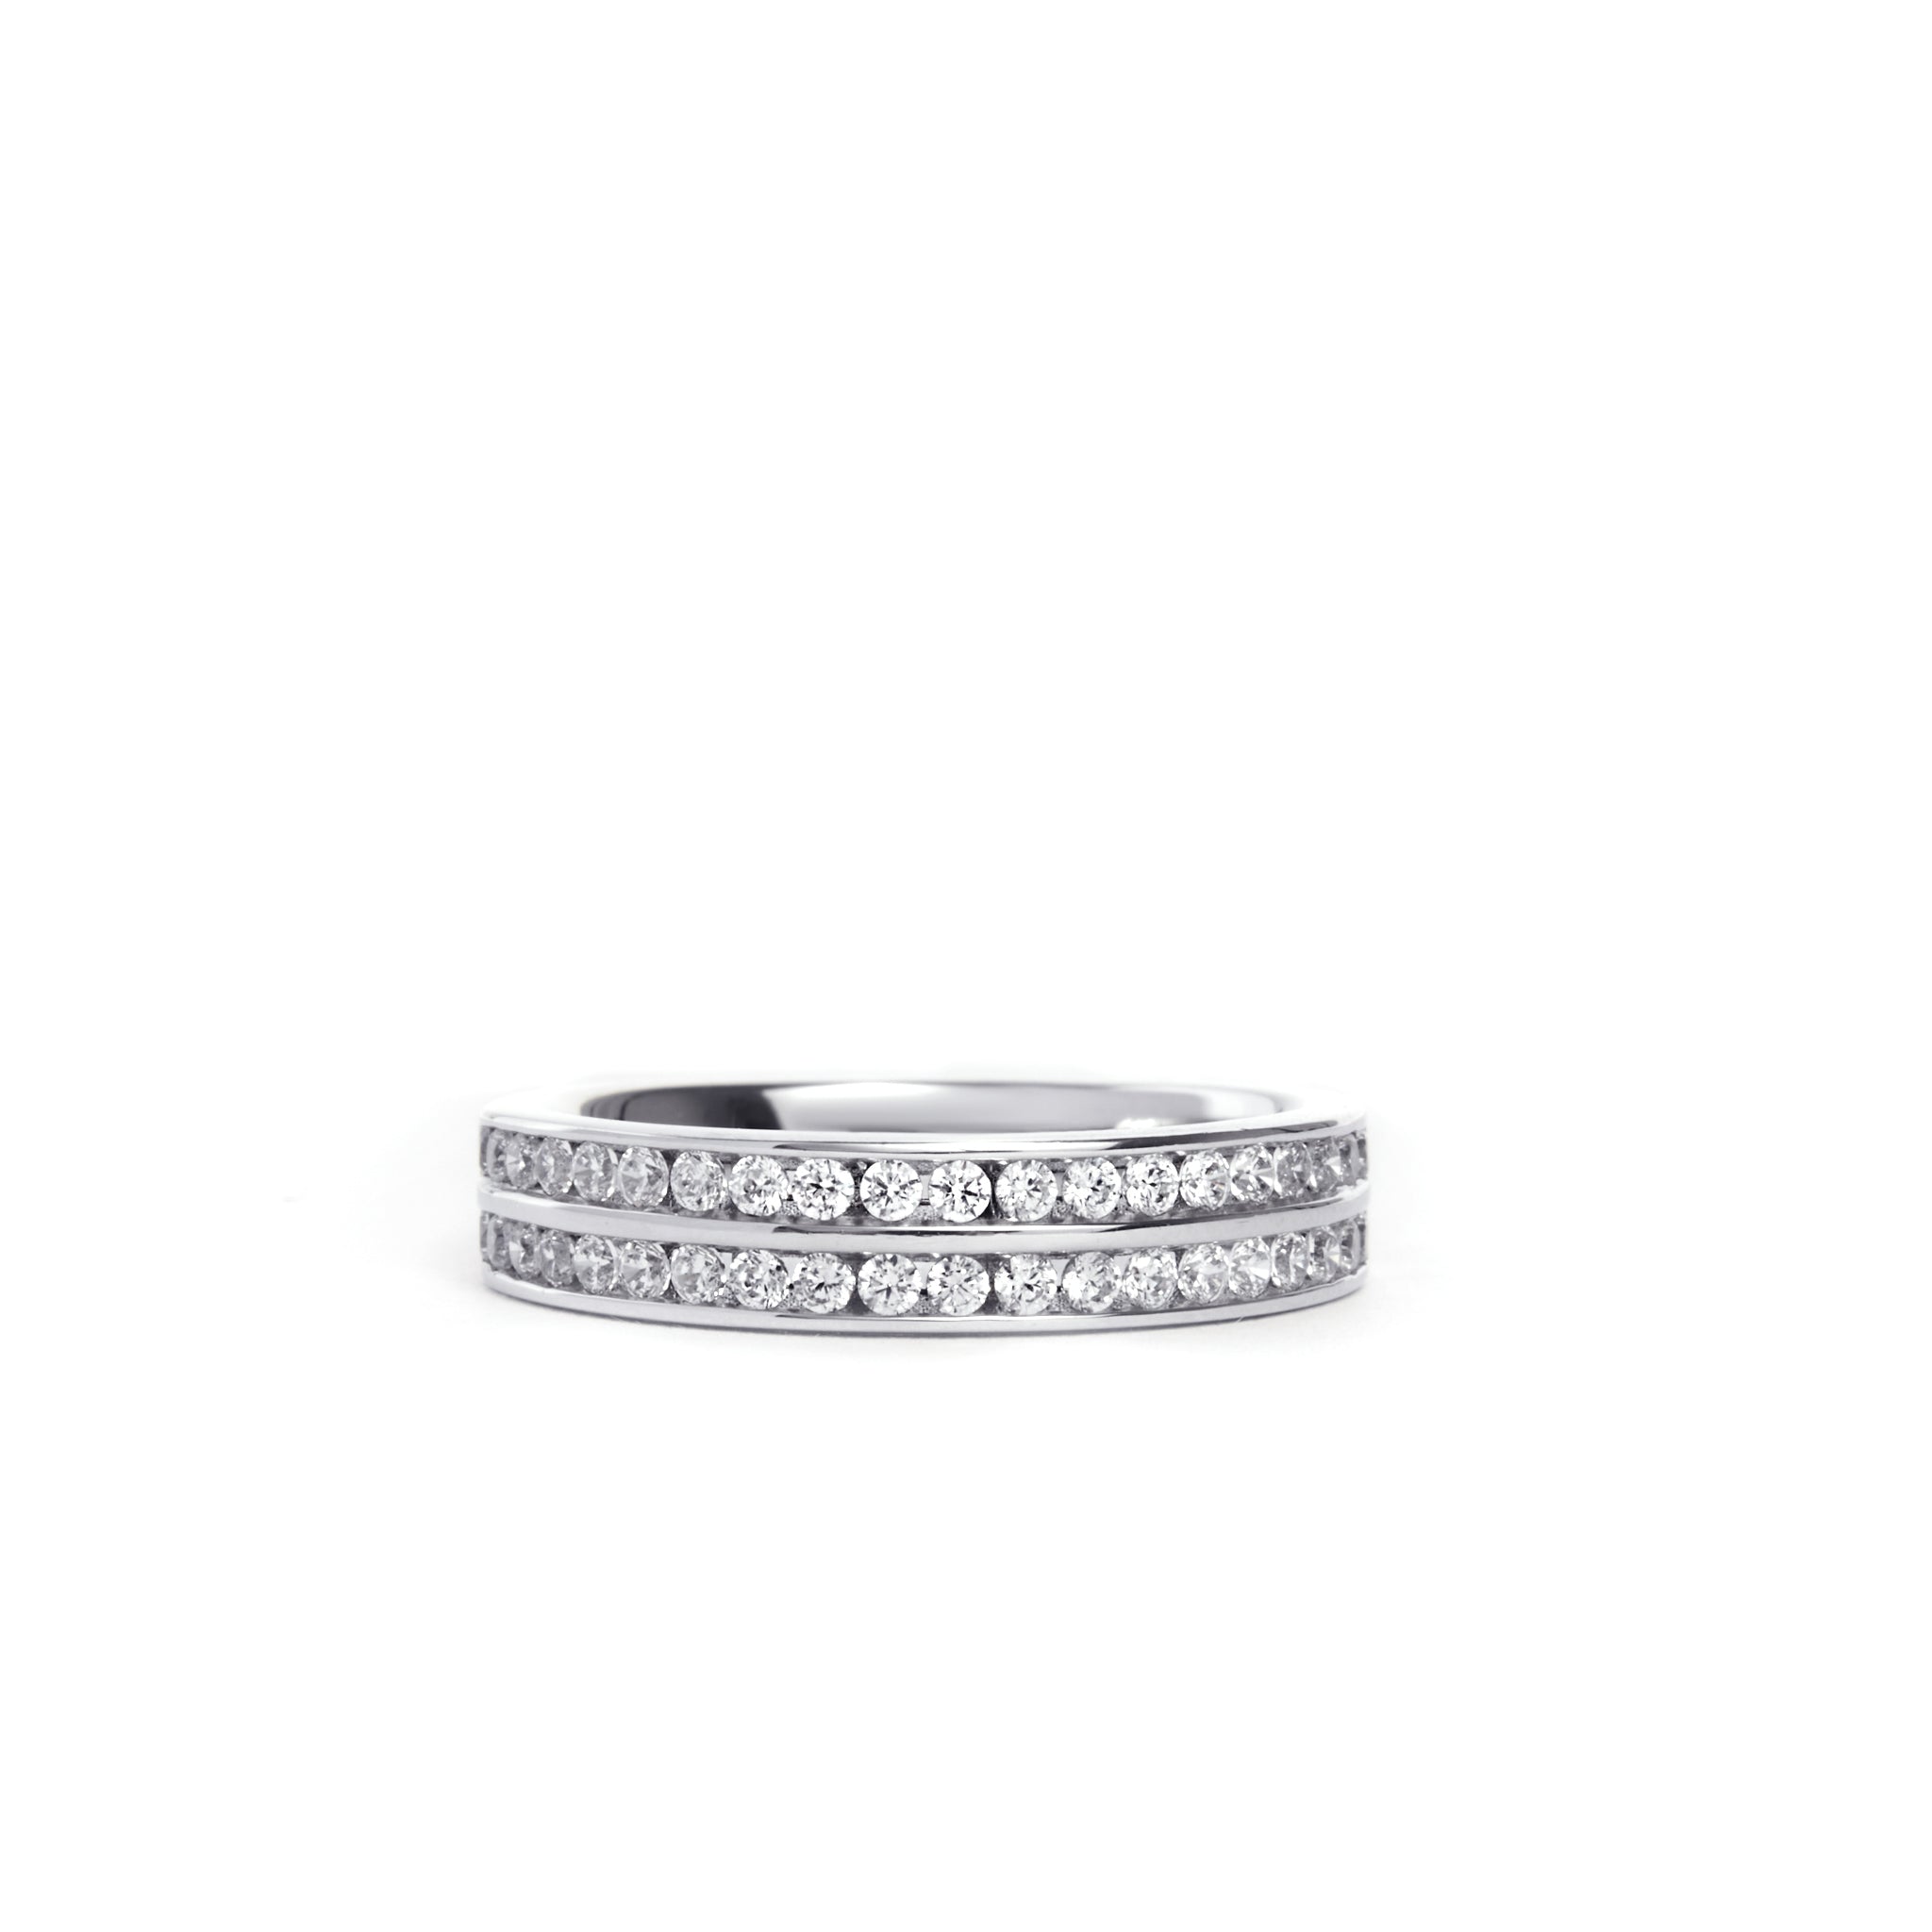 Stunning diamond ring with key features including 18ct White Gold material, Round Brilliant Cut Natural Diamonds, Double Row design, Total Diamond Weight of 0.50ct, G/H Diamond Color, SI Diamond Clarity, and Made to Order option. Add luxury to your collection and make a statement with your style!